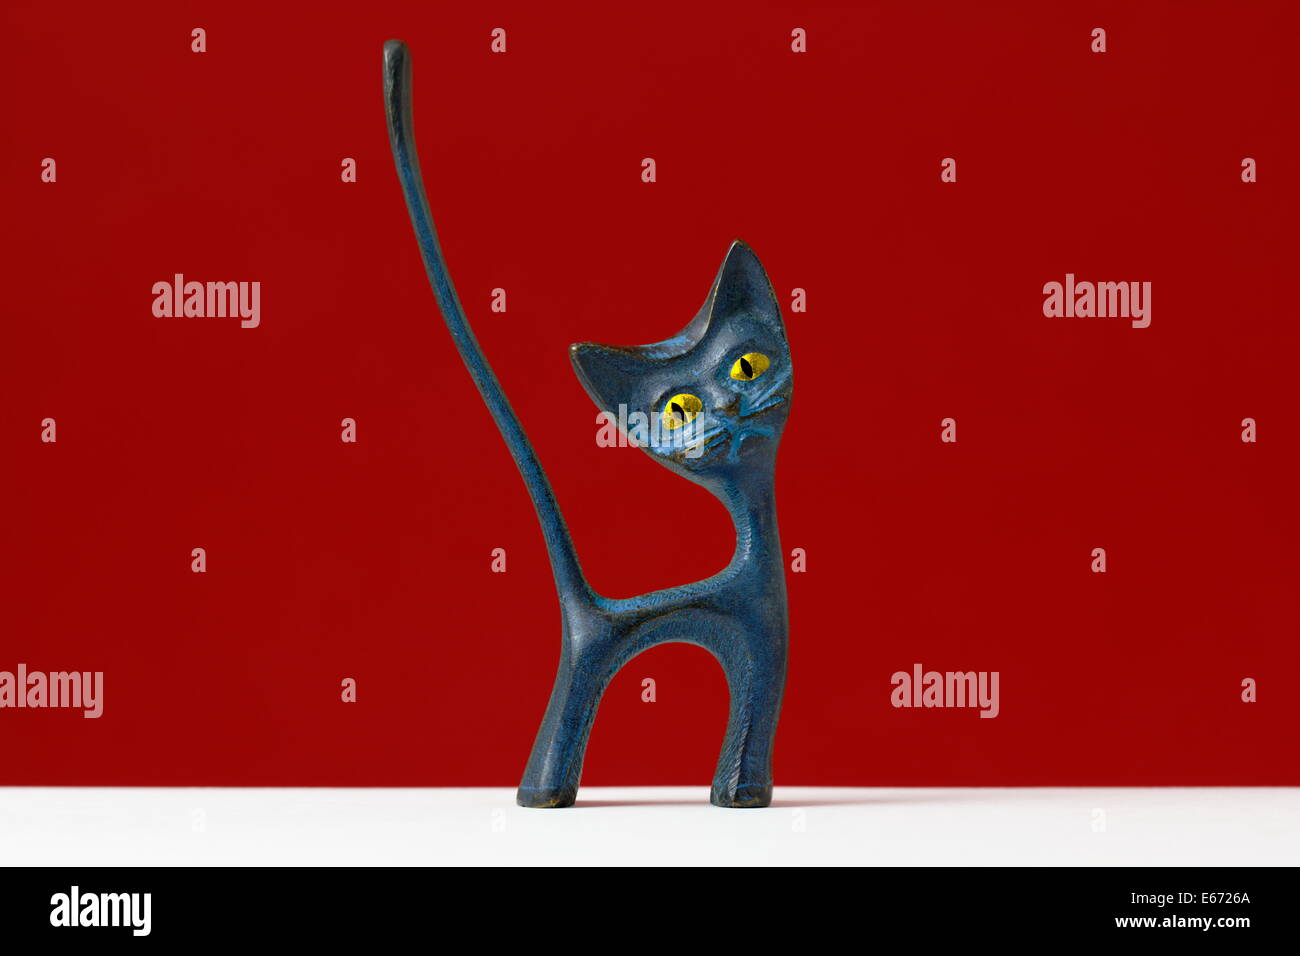 Figurine of a weird cat with cartoon like eyes and long tail on red background. Stock Photo